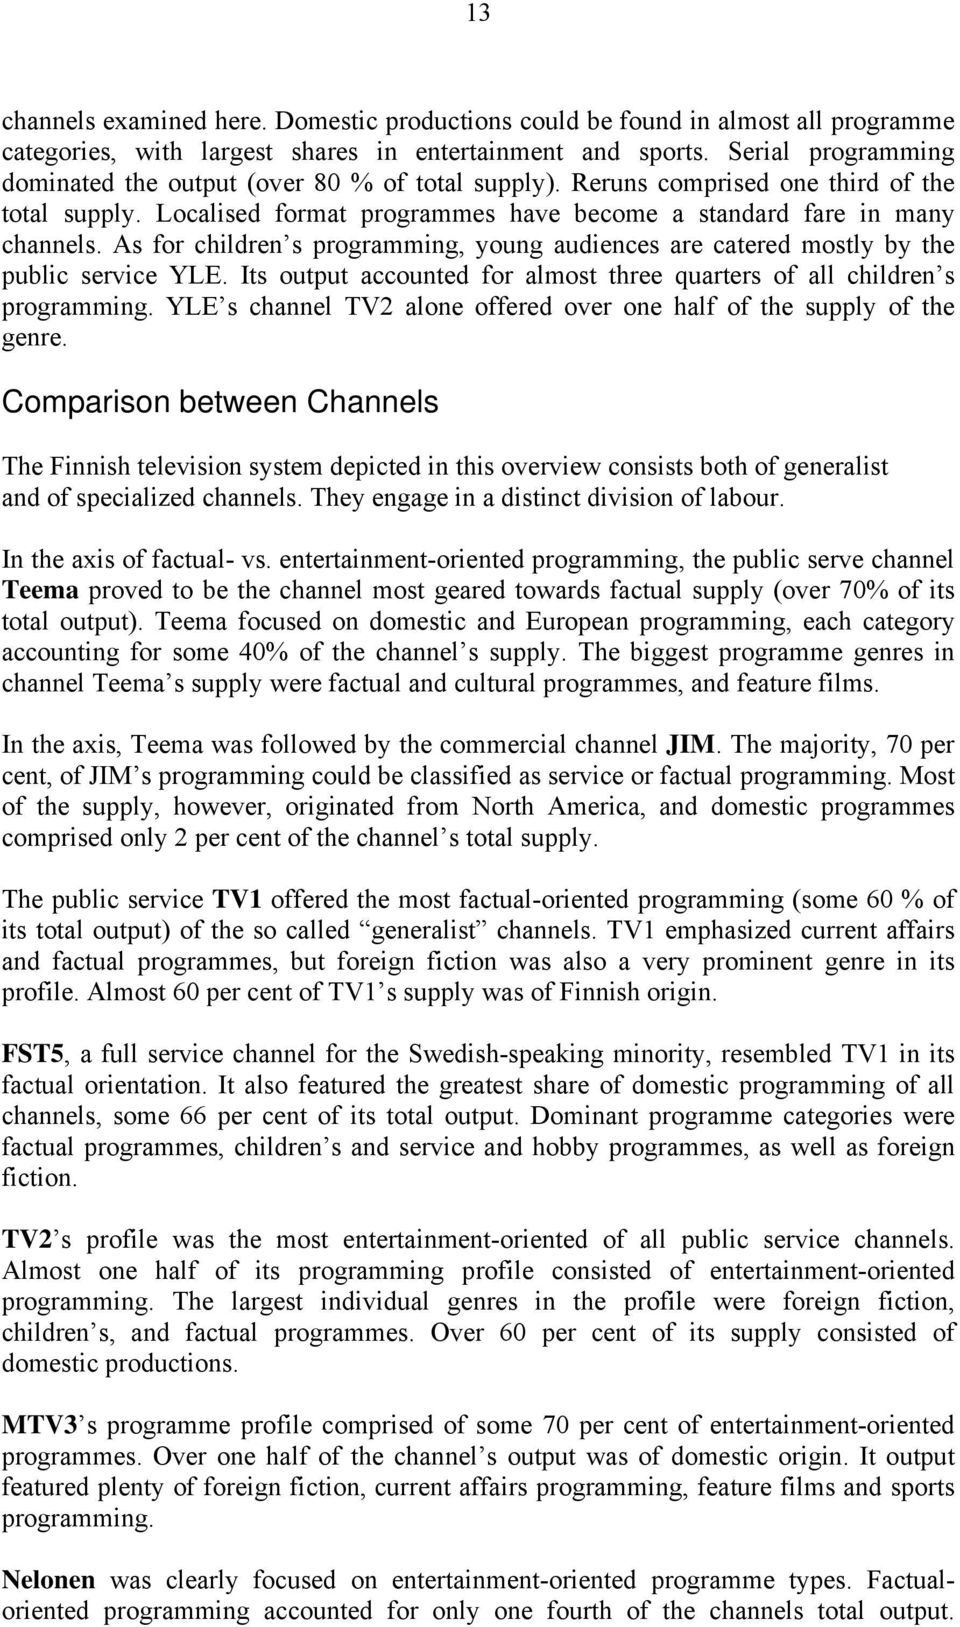 As for children s programming, young audiences are catered mostly by the public service YLE. Its output accounted for almost three quarters of all children s programming.